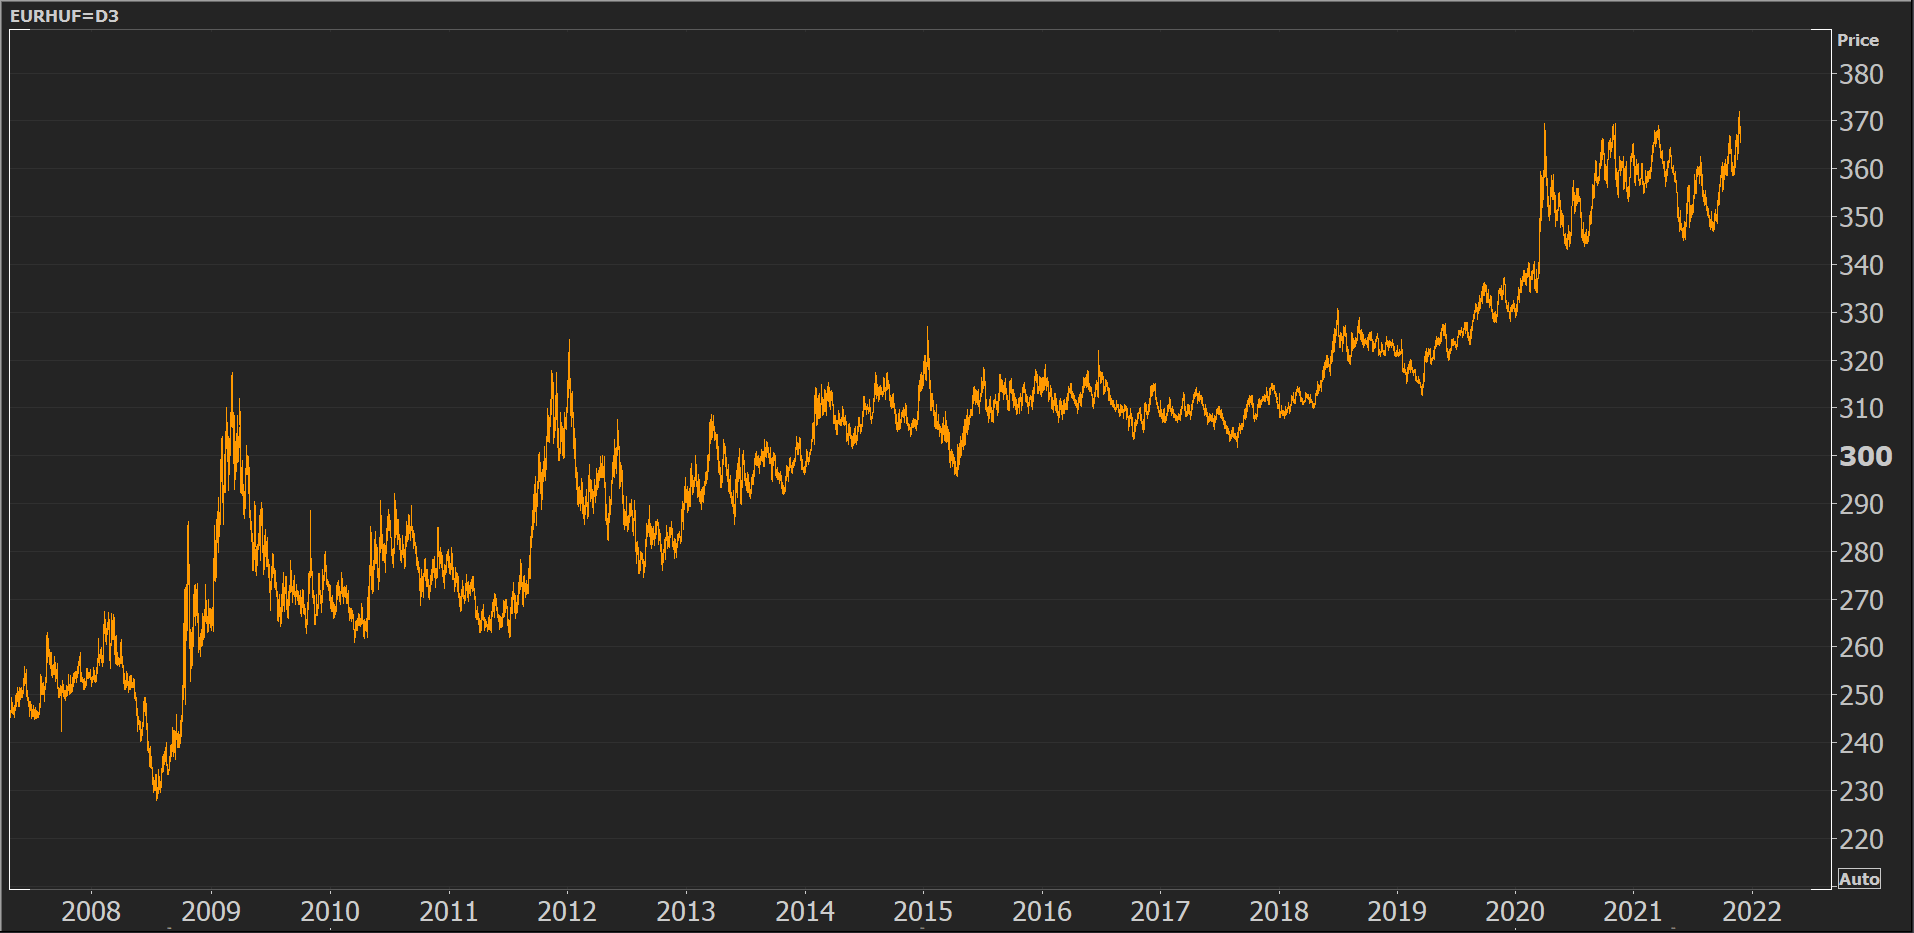 The forint has recovered somewhat since hitting a new all-time low